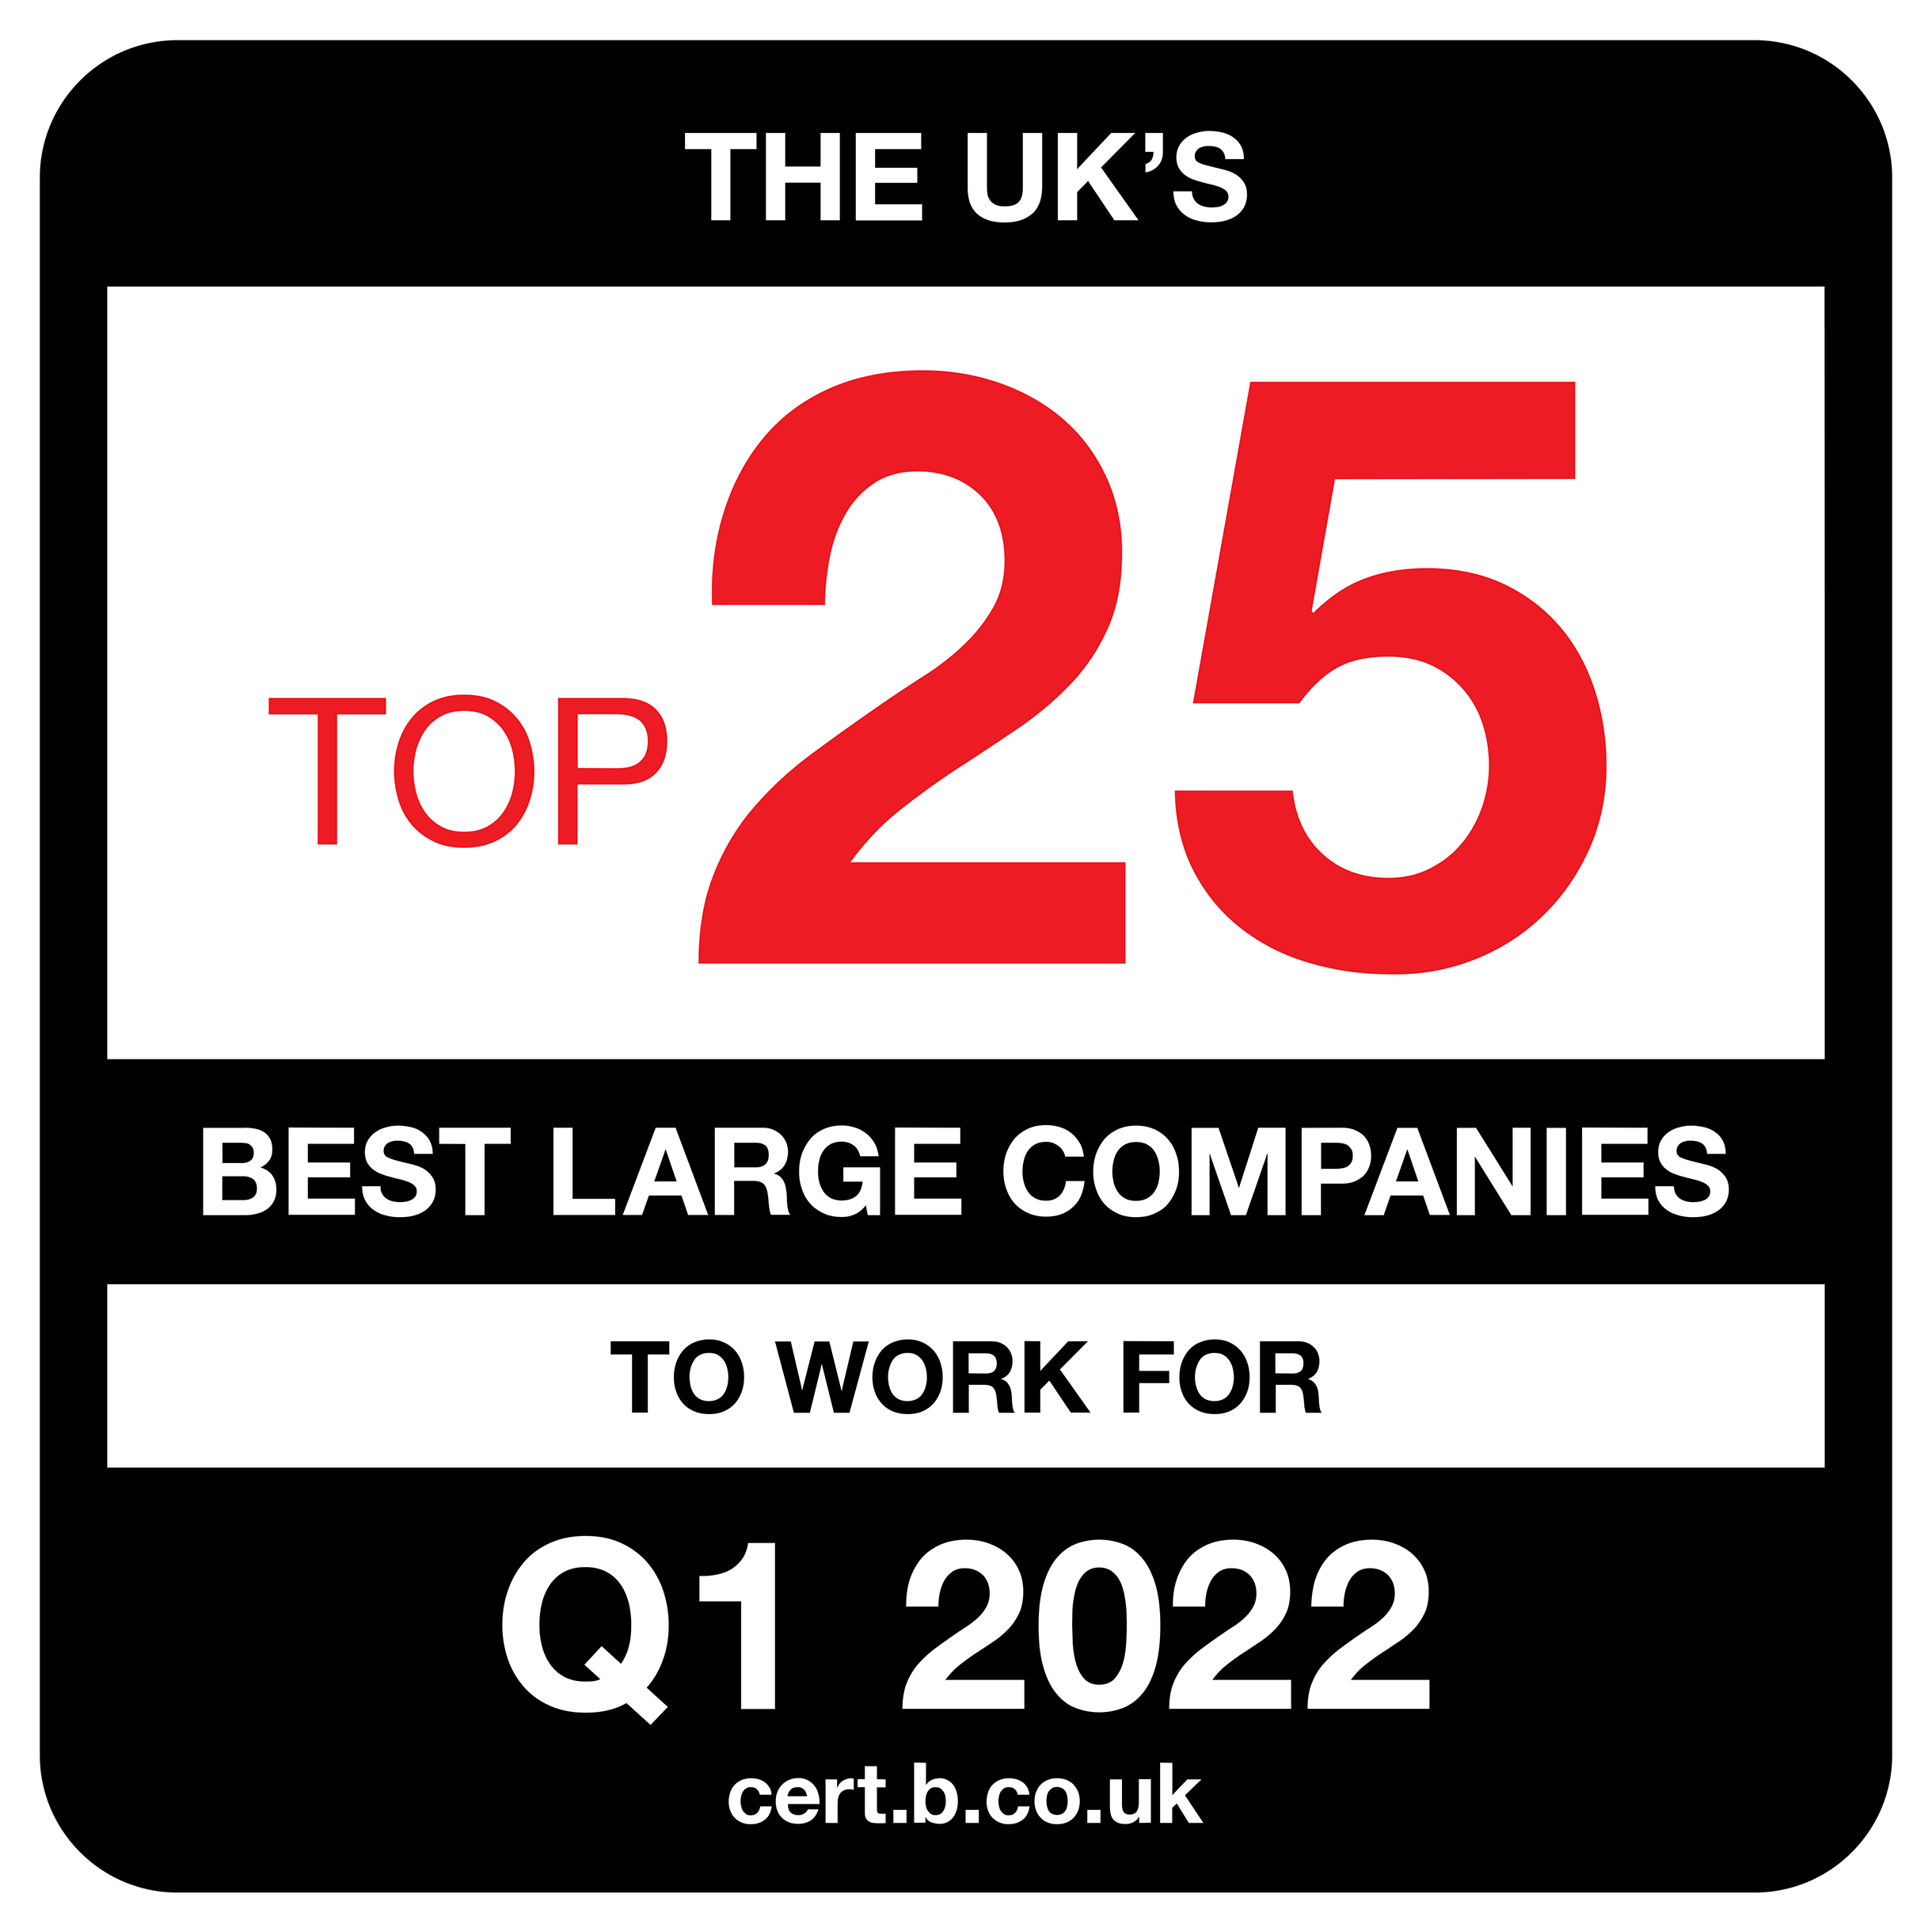 13th in the UK's Best Large Companies to Work for